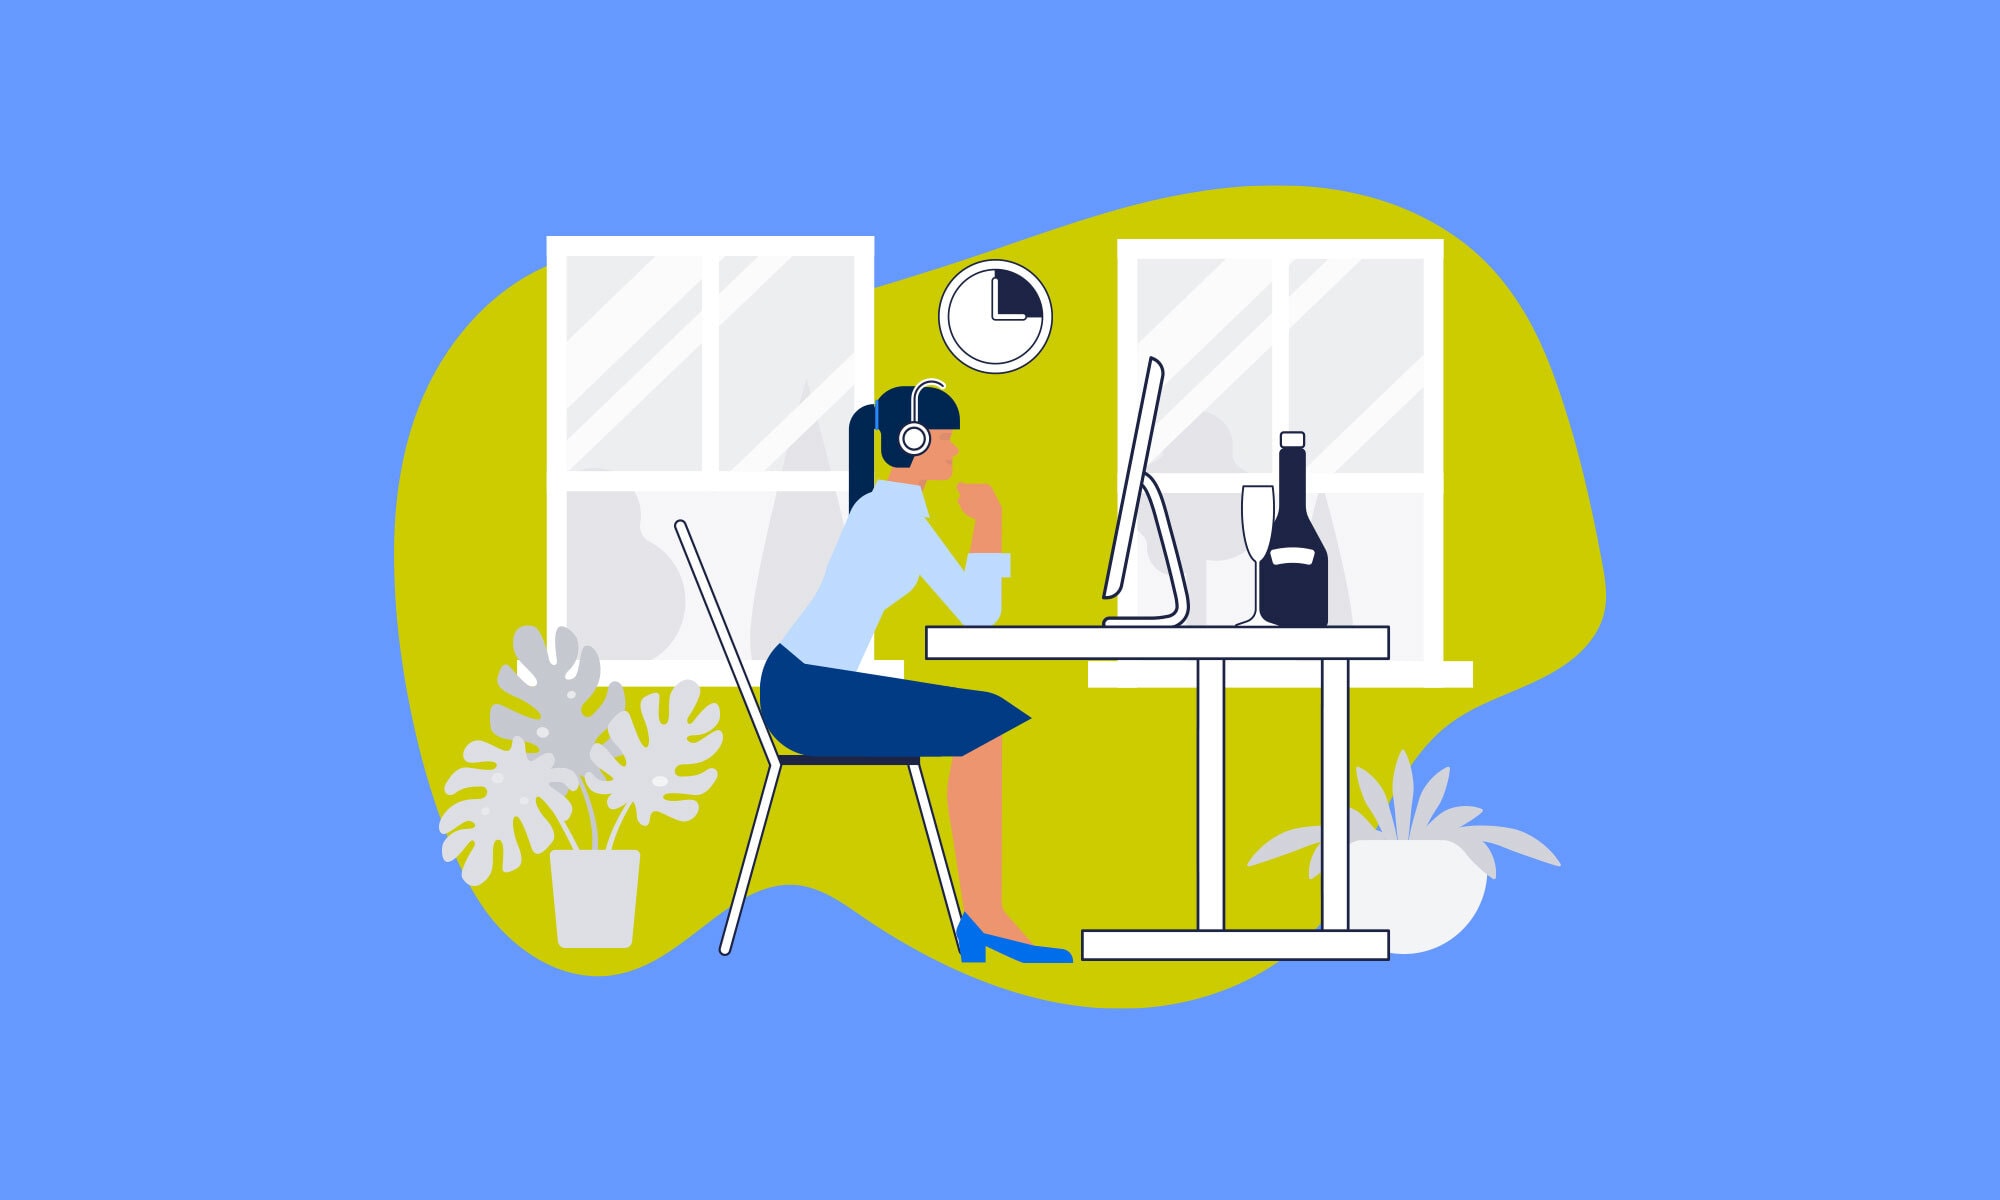 illustration of a woman seated at desk looking at computer. She is wearing headphones and appears to be in a home office surrounded by windows and plants. The background is bright blue with an abstract green shape behind the illustration.